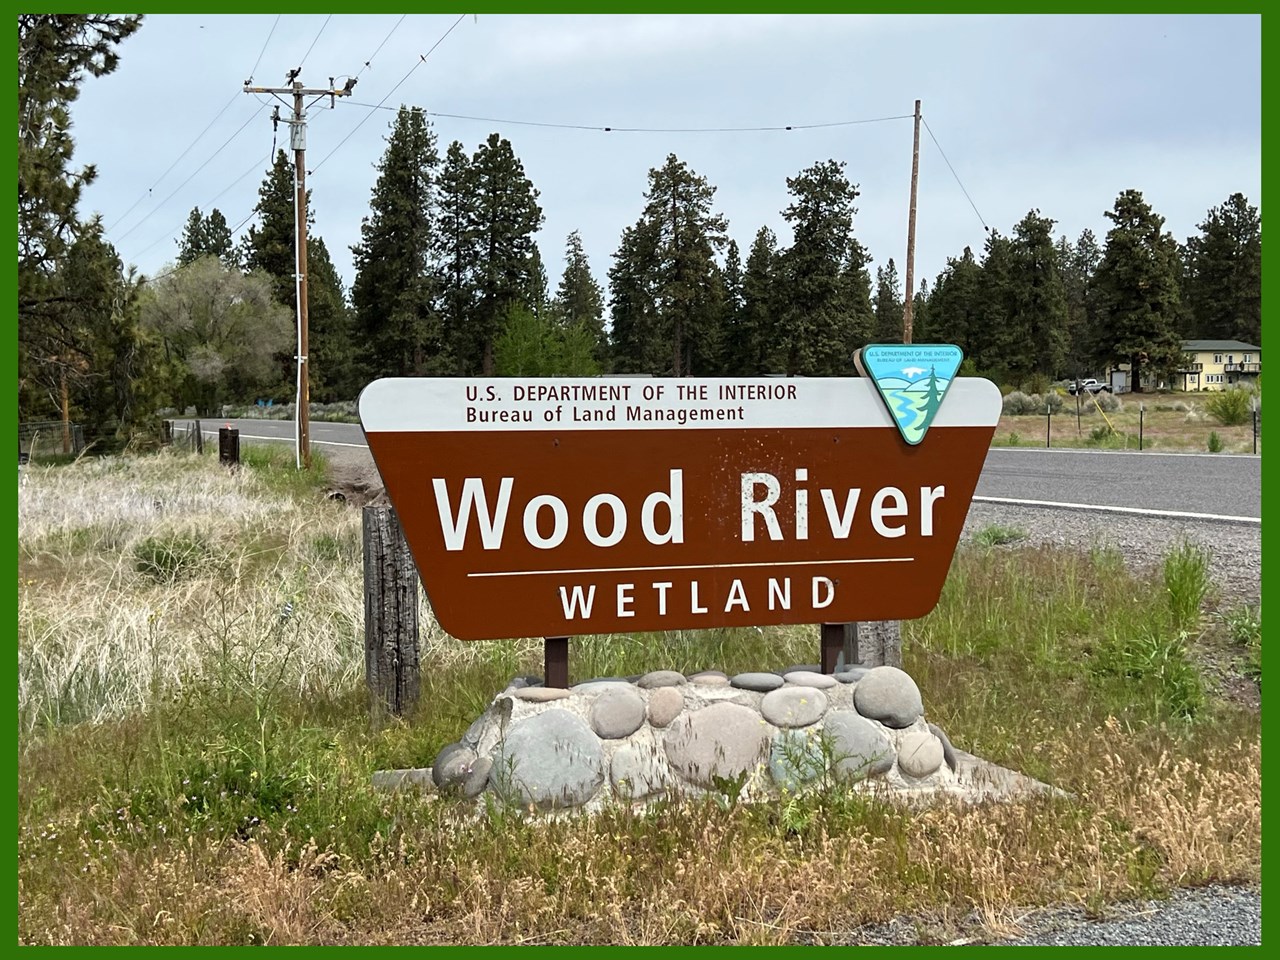 wood river wetland is at the north end of agency lake. this part of klamath county is on the pacific flyway for migratory birds, and over 300 species of birds migrate through the area including bald eagles, sandhill cranes and pelicans!